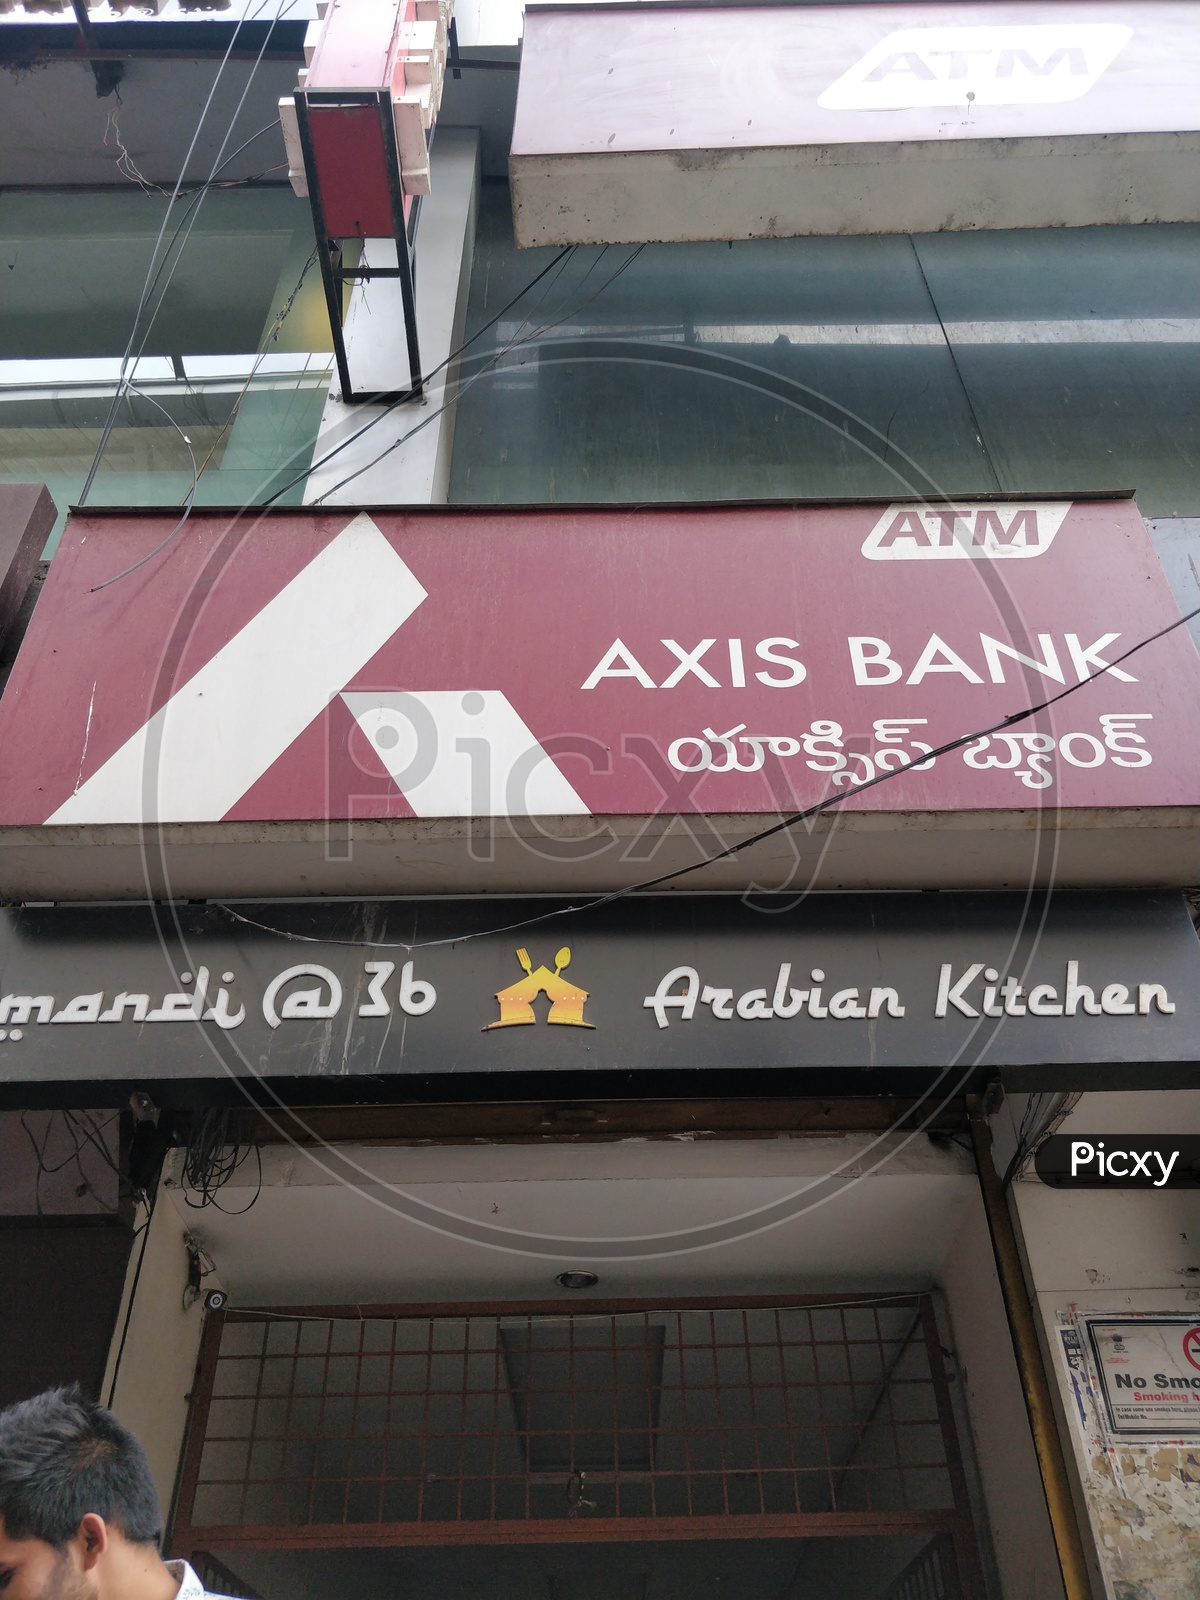 Axis bank and Arabian kitchen place front